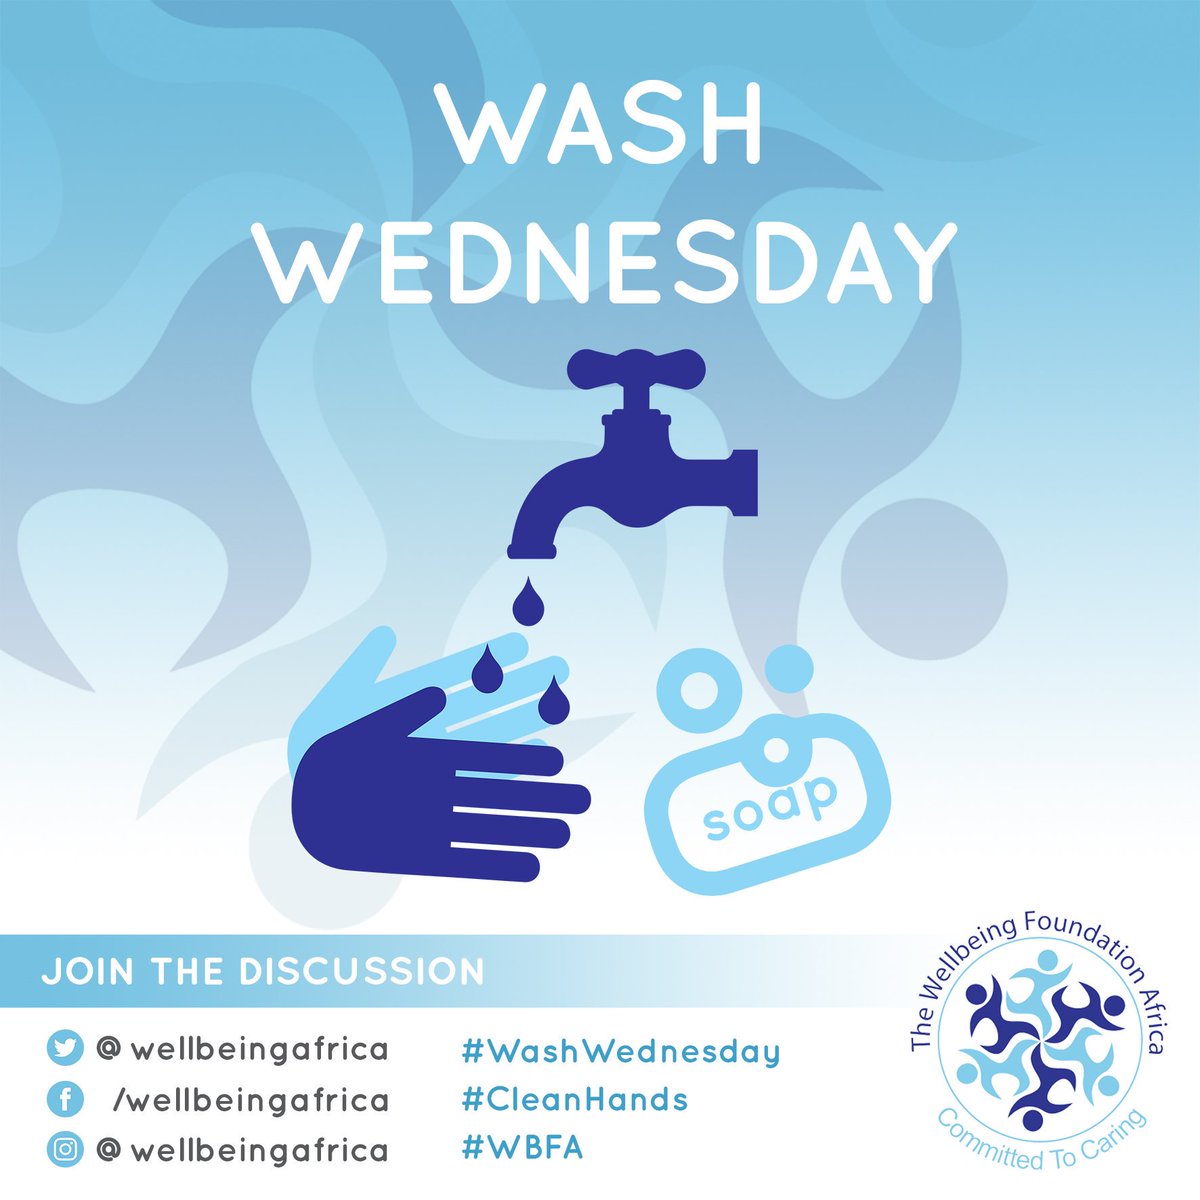 Today on #WASHWednesday, we analyse the key roles #breastfeeding plays in reducing infections such as #cholera. Promoting proper water, sanitation and hygiene during #breastfeeding guarantees improved health for babies. #WASH #nutrition #HealthForAll @ToyinSaraki @GlobalWater2020